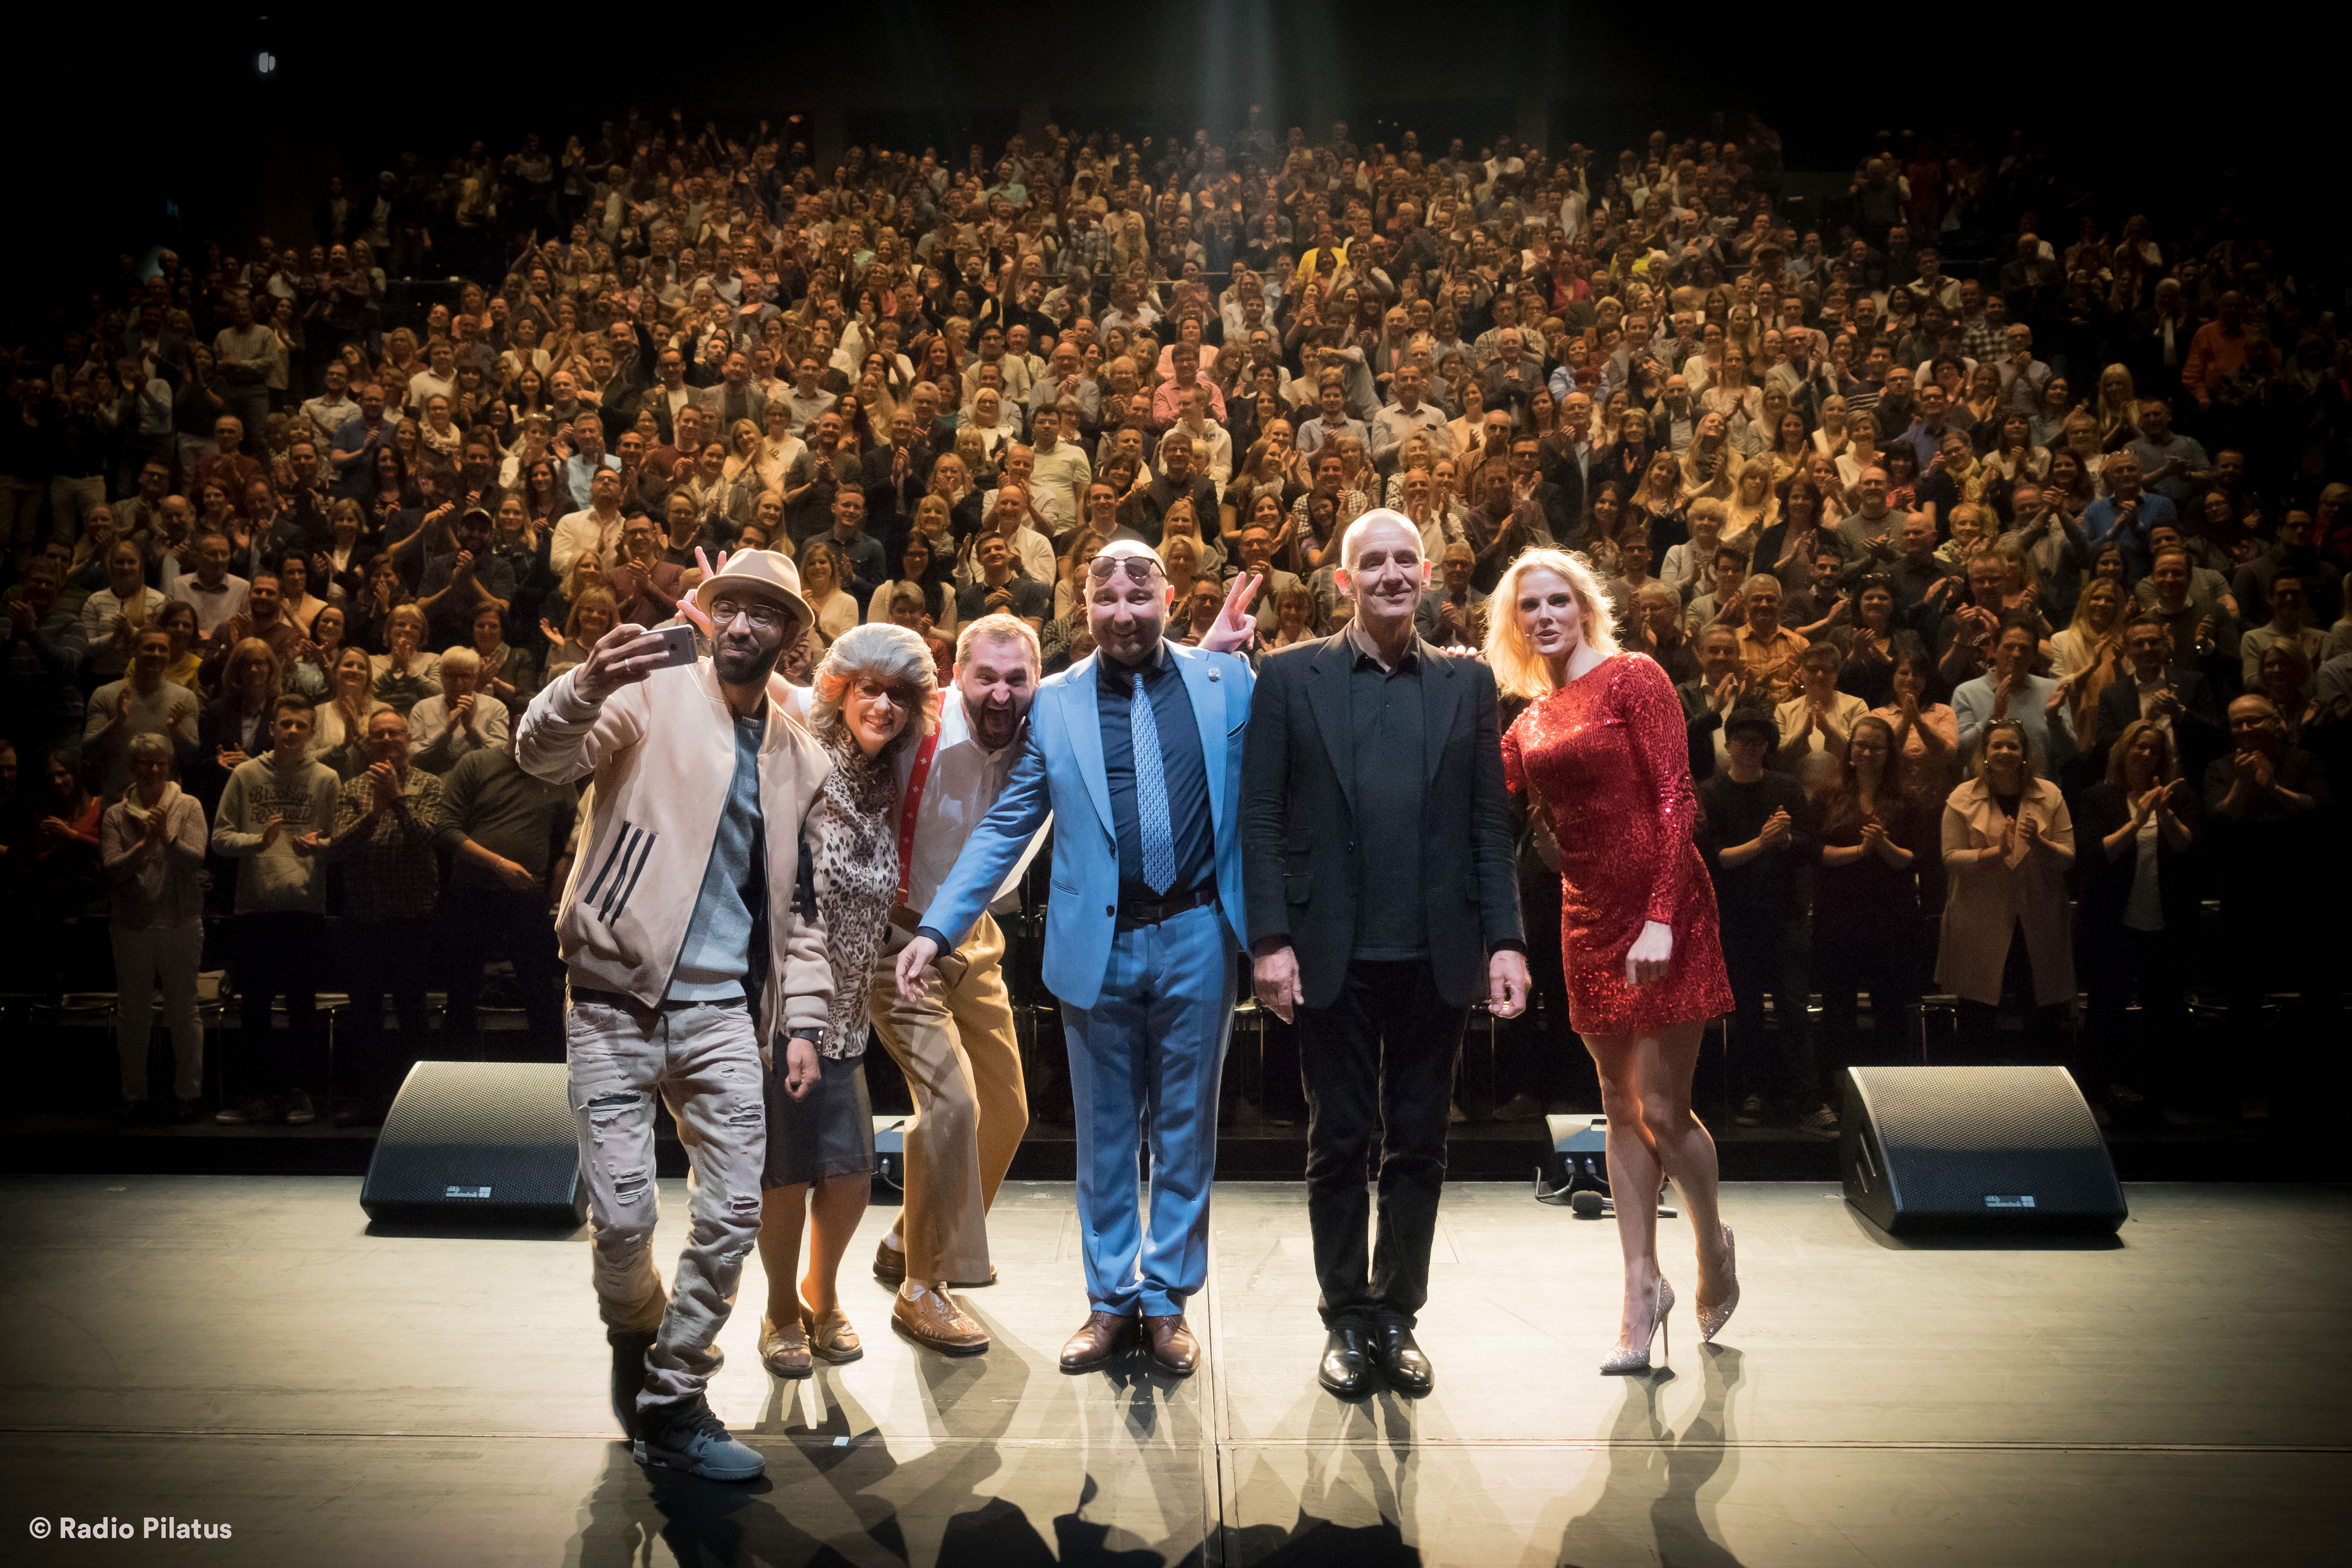 Group picture of the Performers of the Radio Pilatus Comedy Night in the Lucerne Hall of the KKL Lucerne